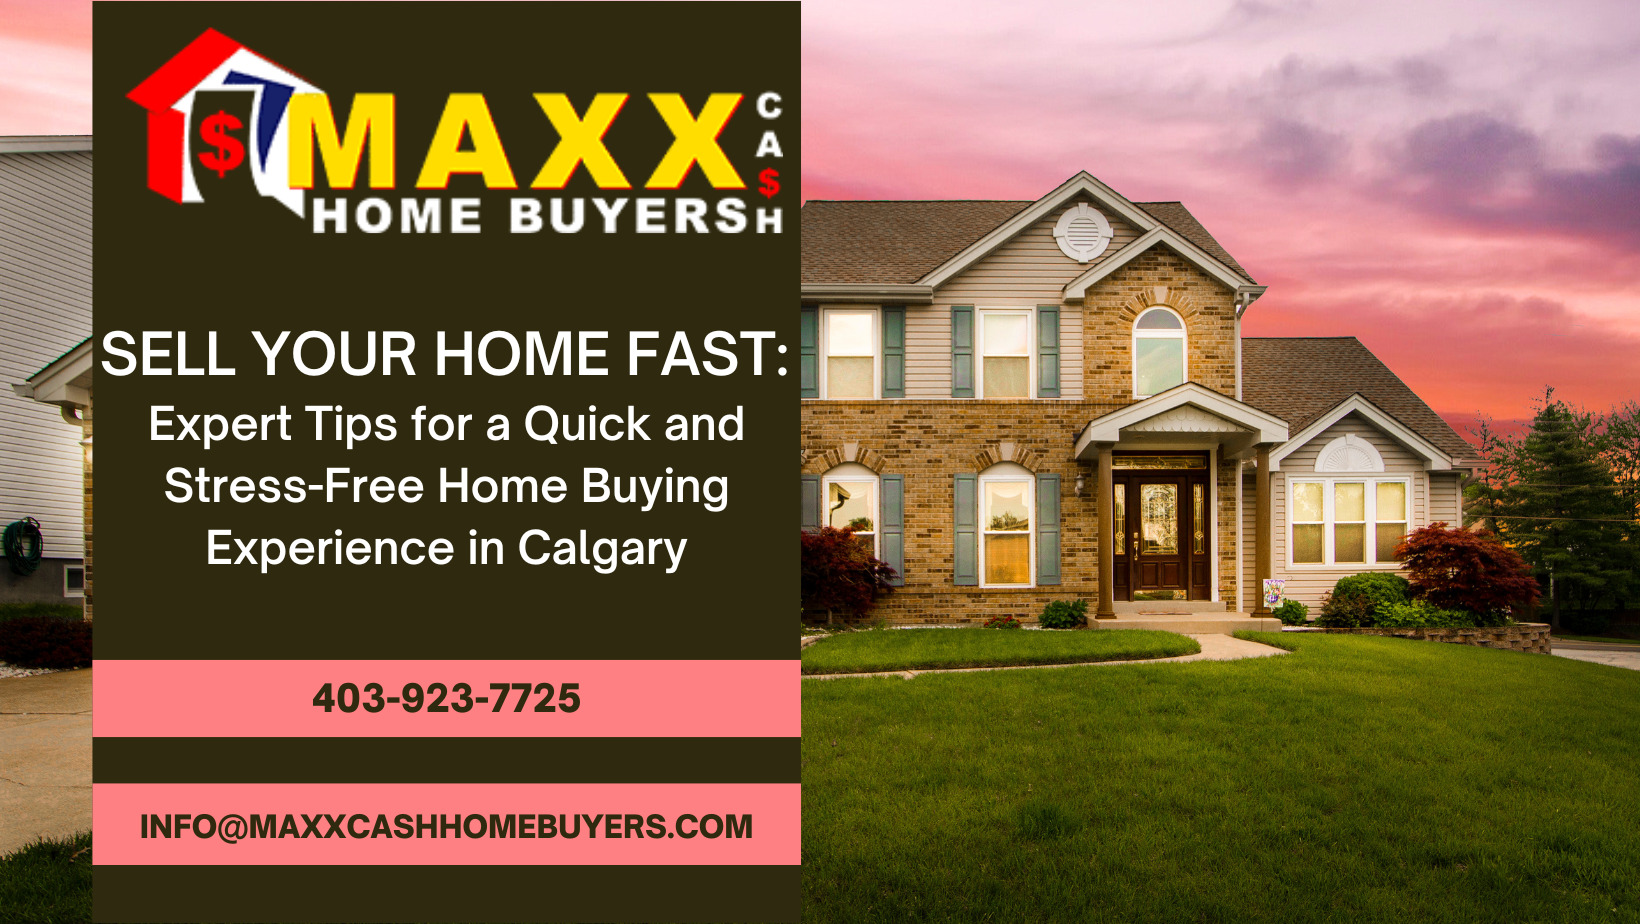 Sell Your Home Fast: Expert Tips for a Quick and Stress-Free Home Buying Experience in Calgary